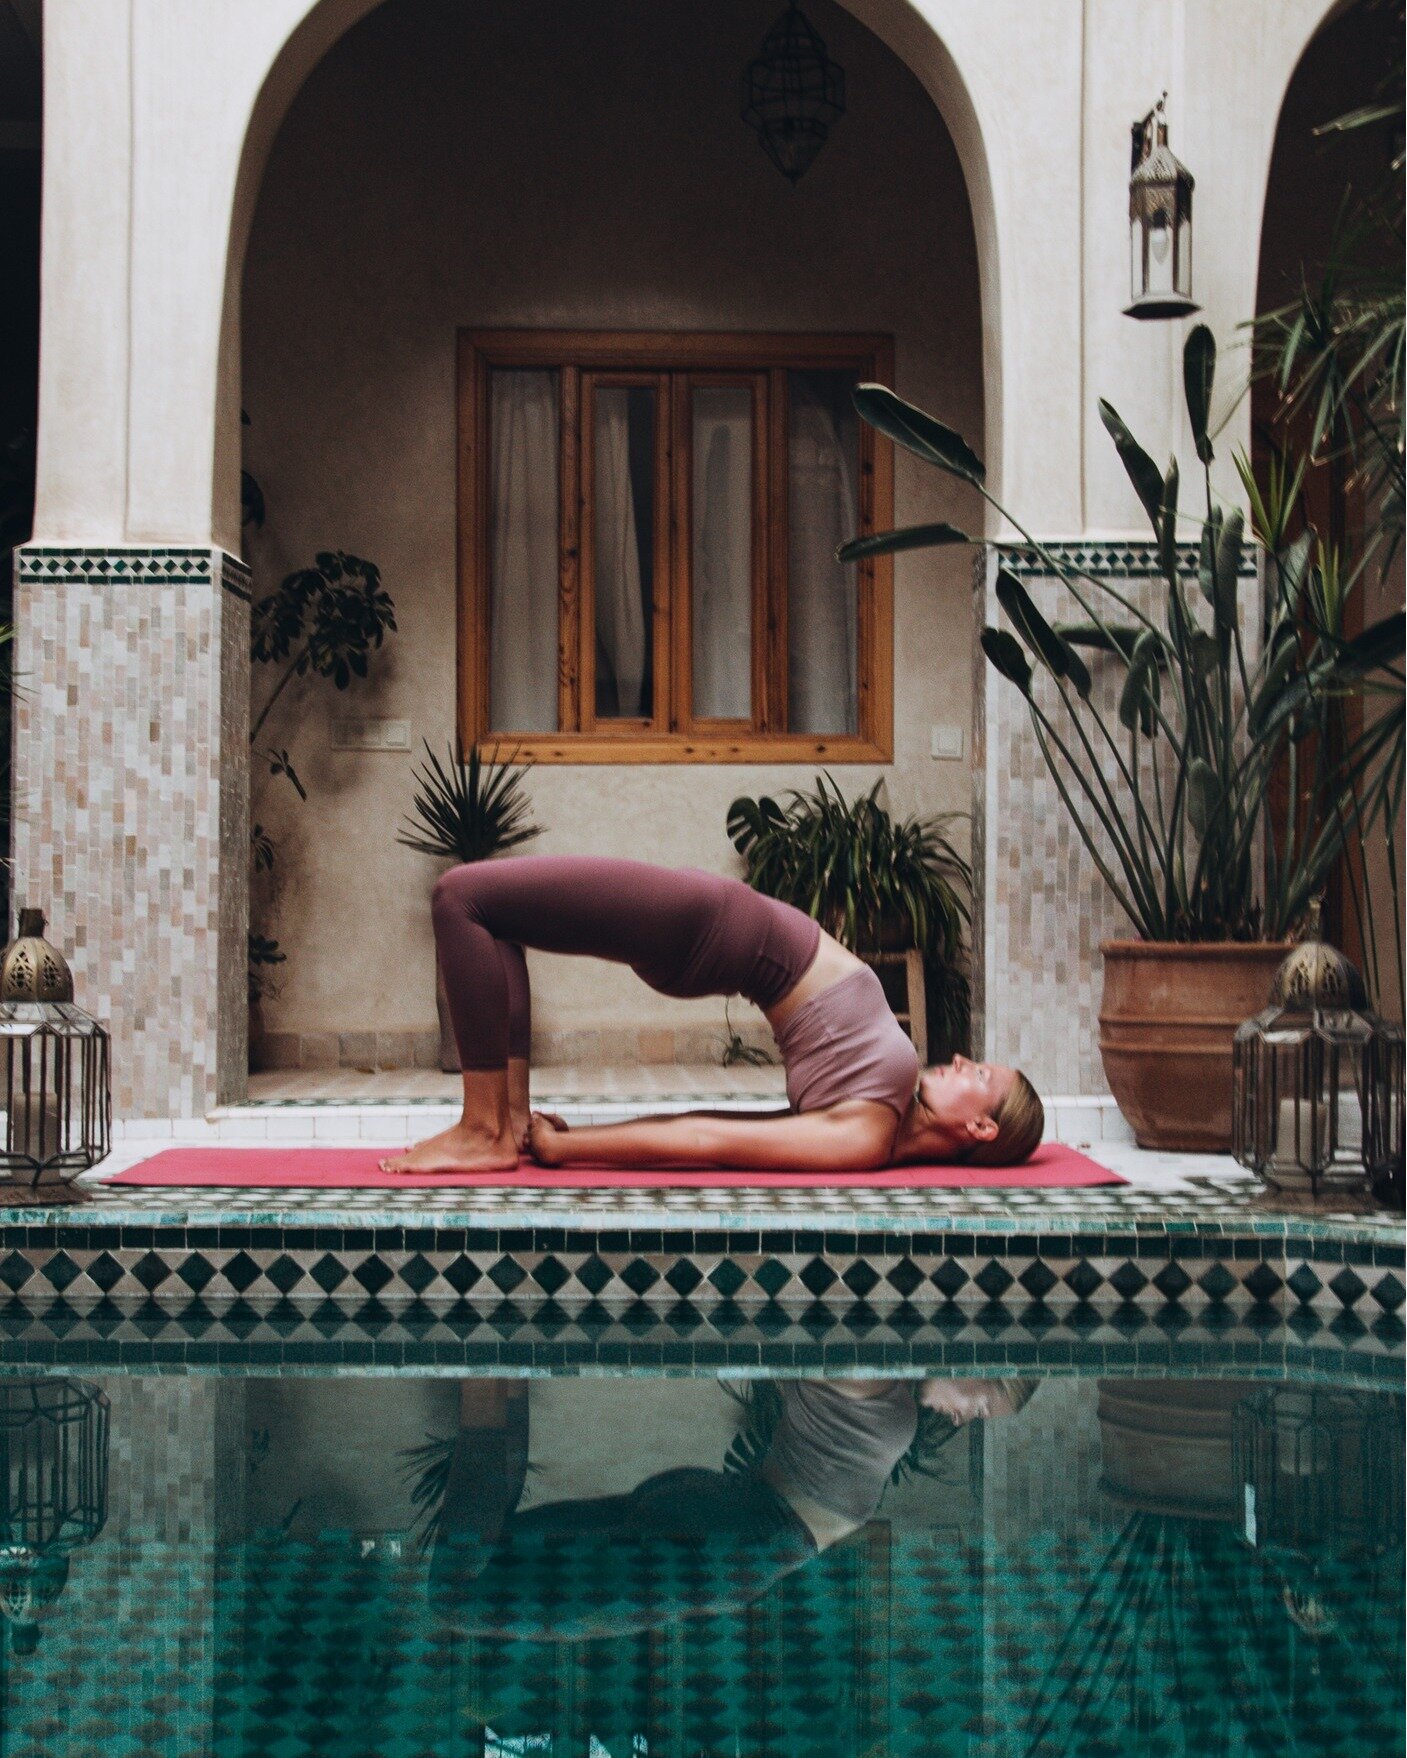 Day 6 of #aloofthe8loves

Empowering and strong! 
How do you feel in bridge pose?
.
Little throwback to this incredible Riad @westsurfmorocco.
.
Let's spread love &amp; kindness💕
.
Day 6 - &quot;Pragma&quot; or Enduring Love
Bridge pose to represent